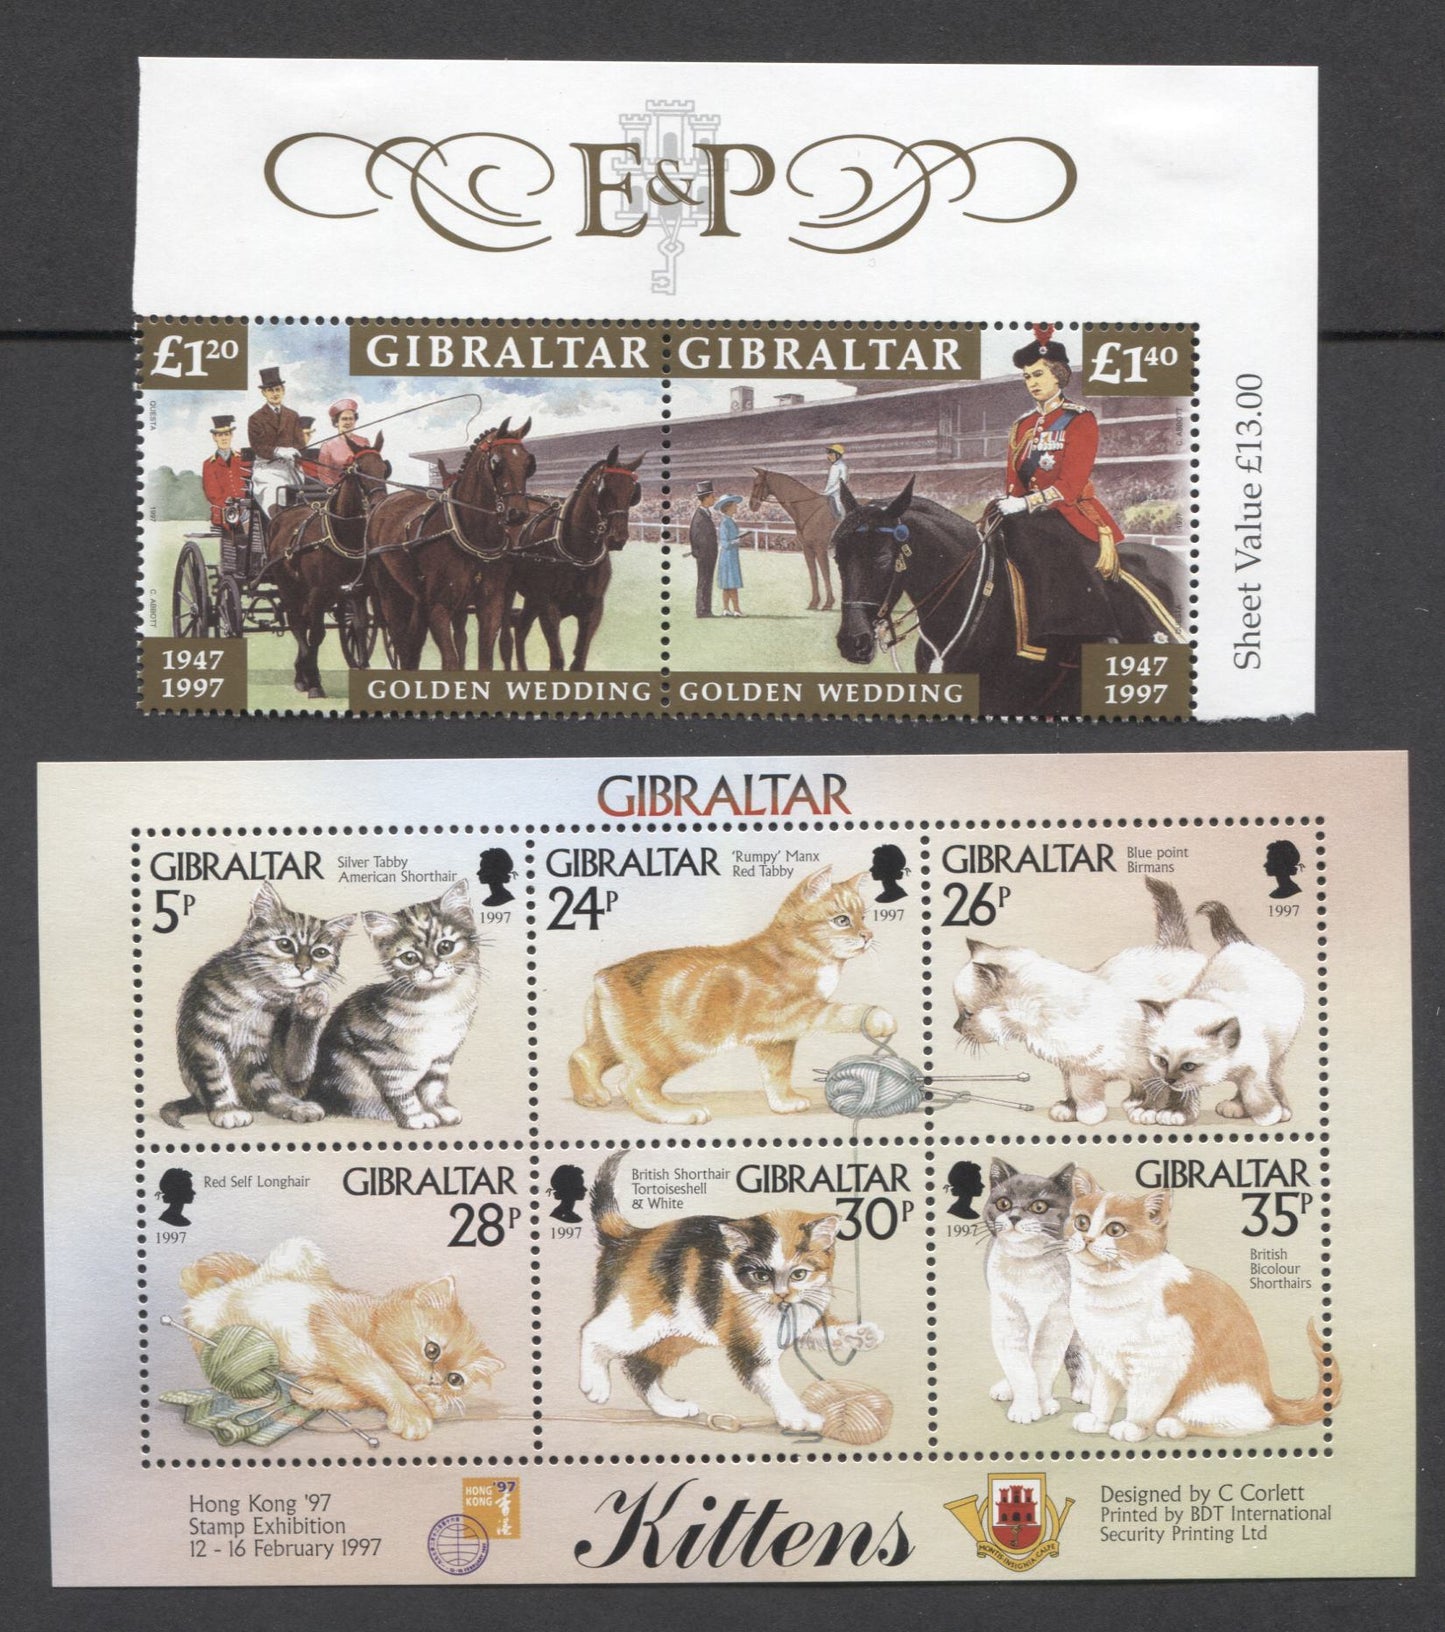 Lot 10 Gibraltar SC#726/734a 1997 Kittens & 50th Wedding Anniversary Issues, 2 VFNH/OG Souvenir Sheets, Click on Listing to See ALL Pictures, 2017 Scott Cat. $18.75